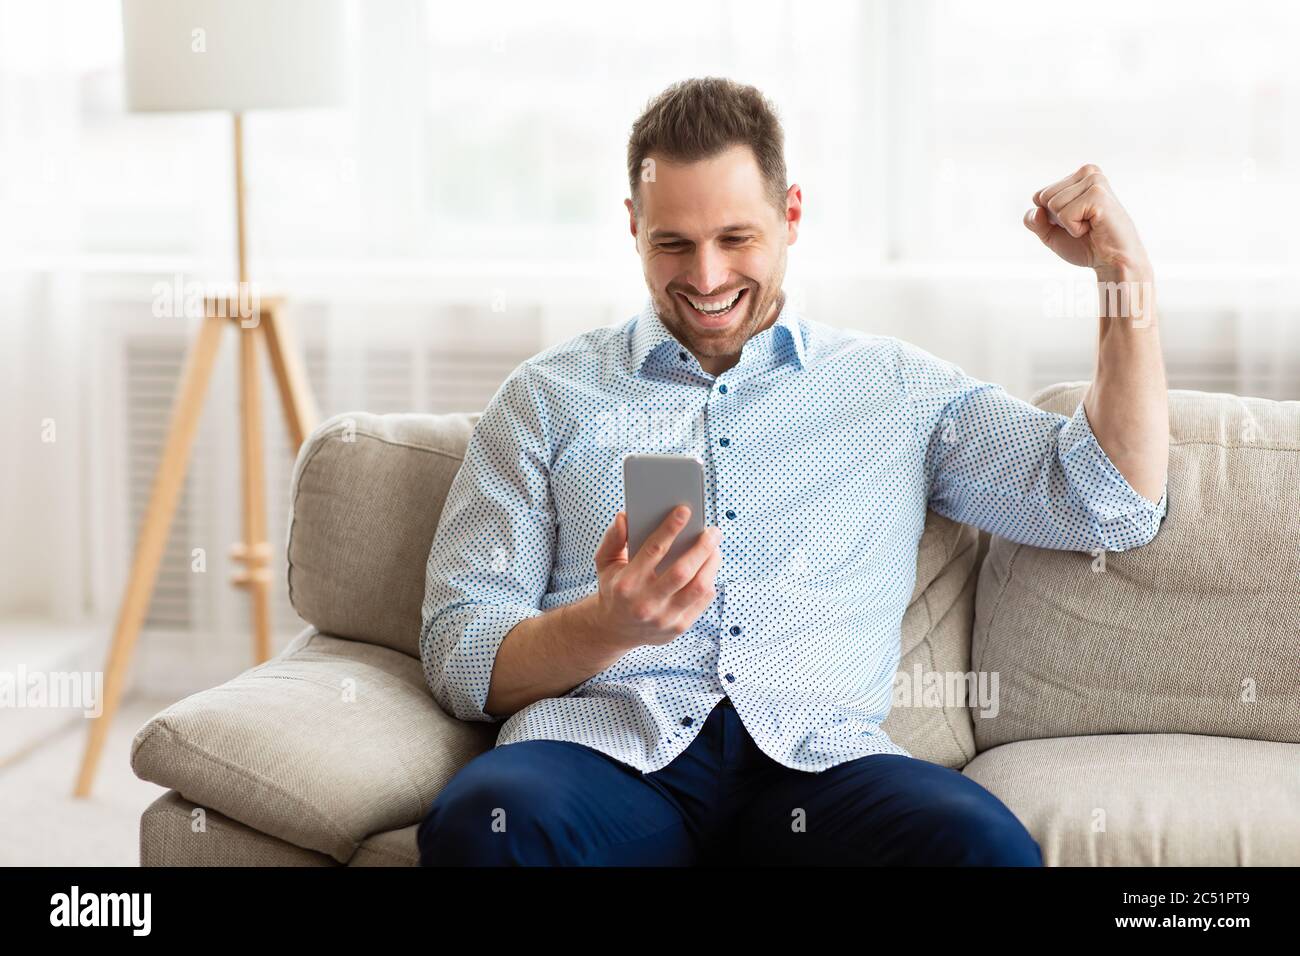 Excited adult man feeling ecstatic holding phone Stock Photo